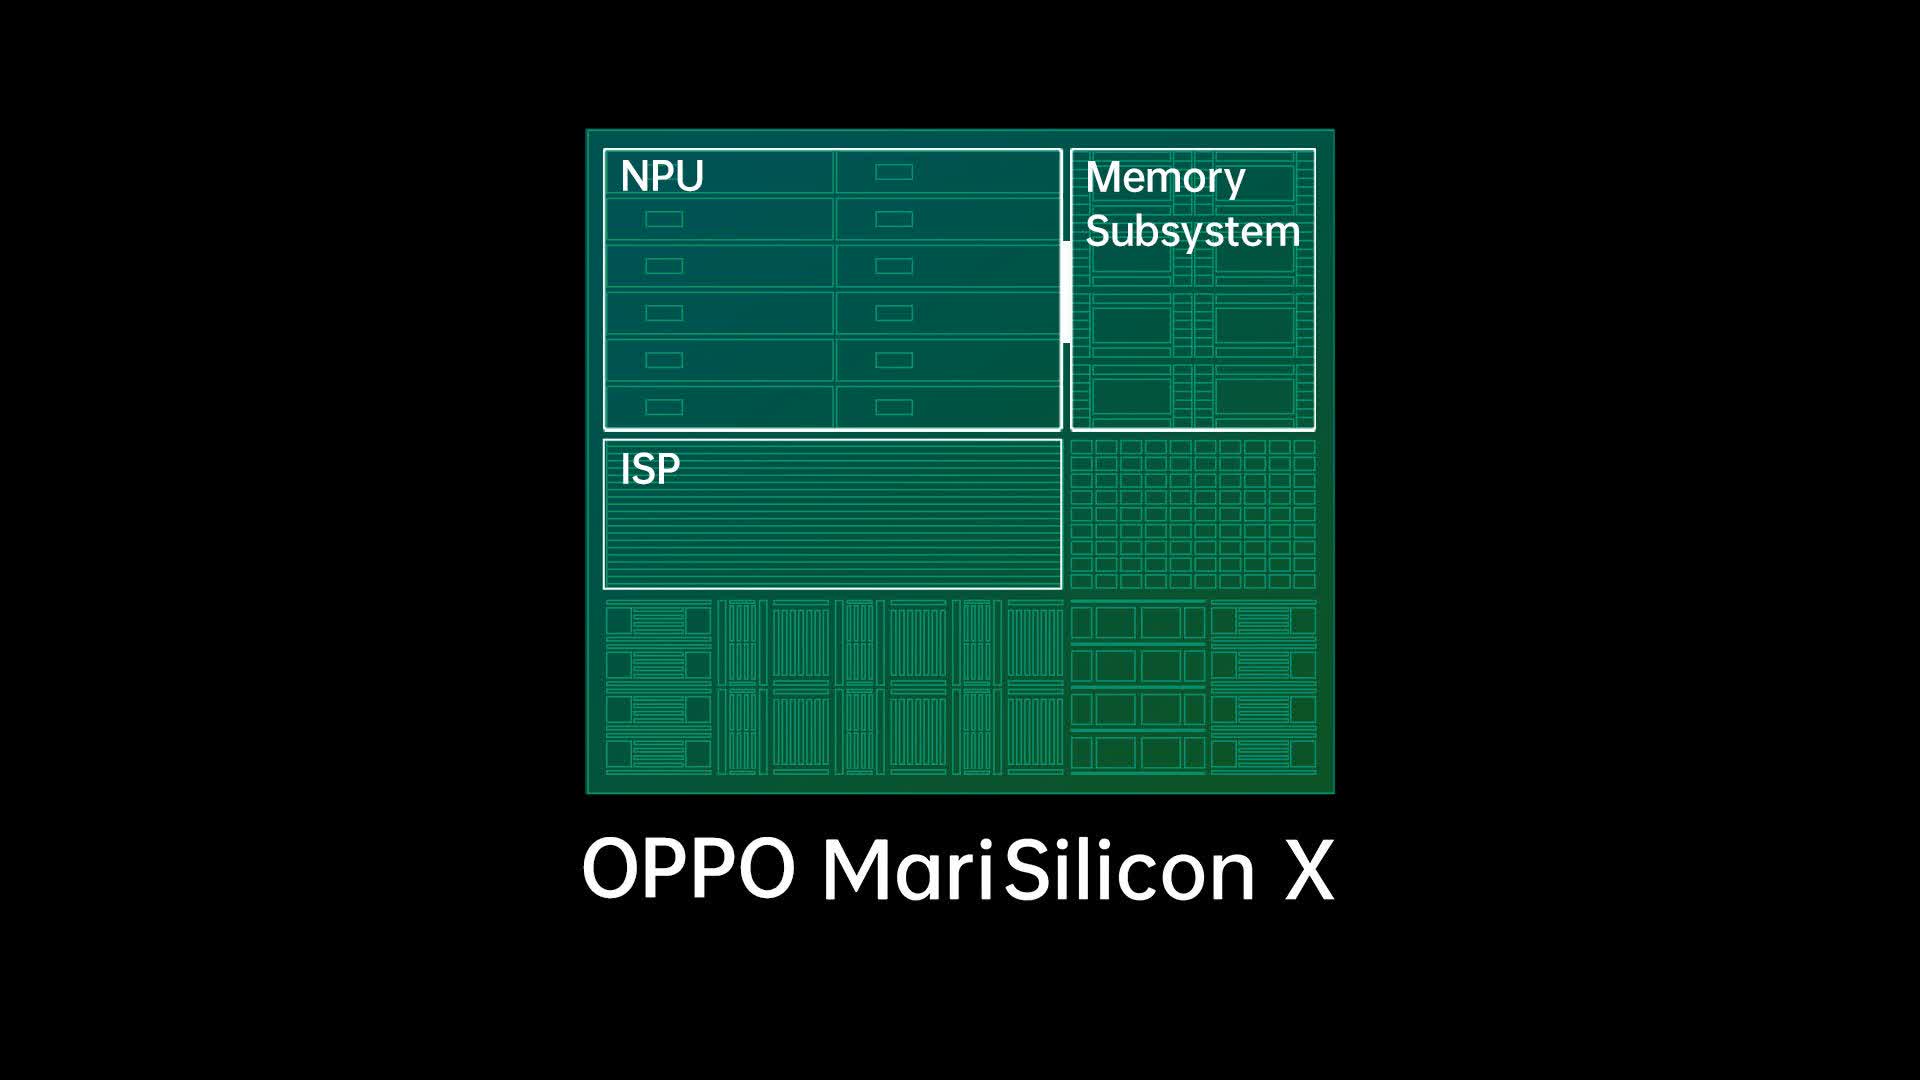 Oppo announces MariSilicon X, a self-made imaging NPU chipset